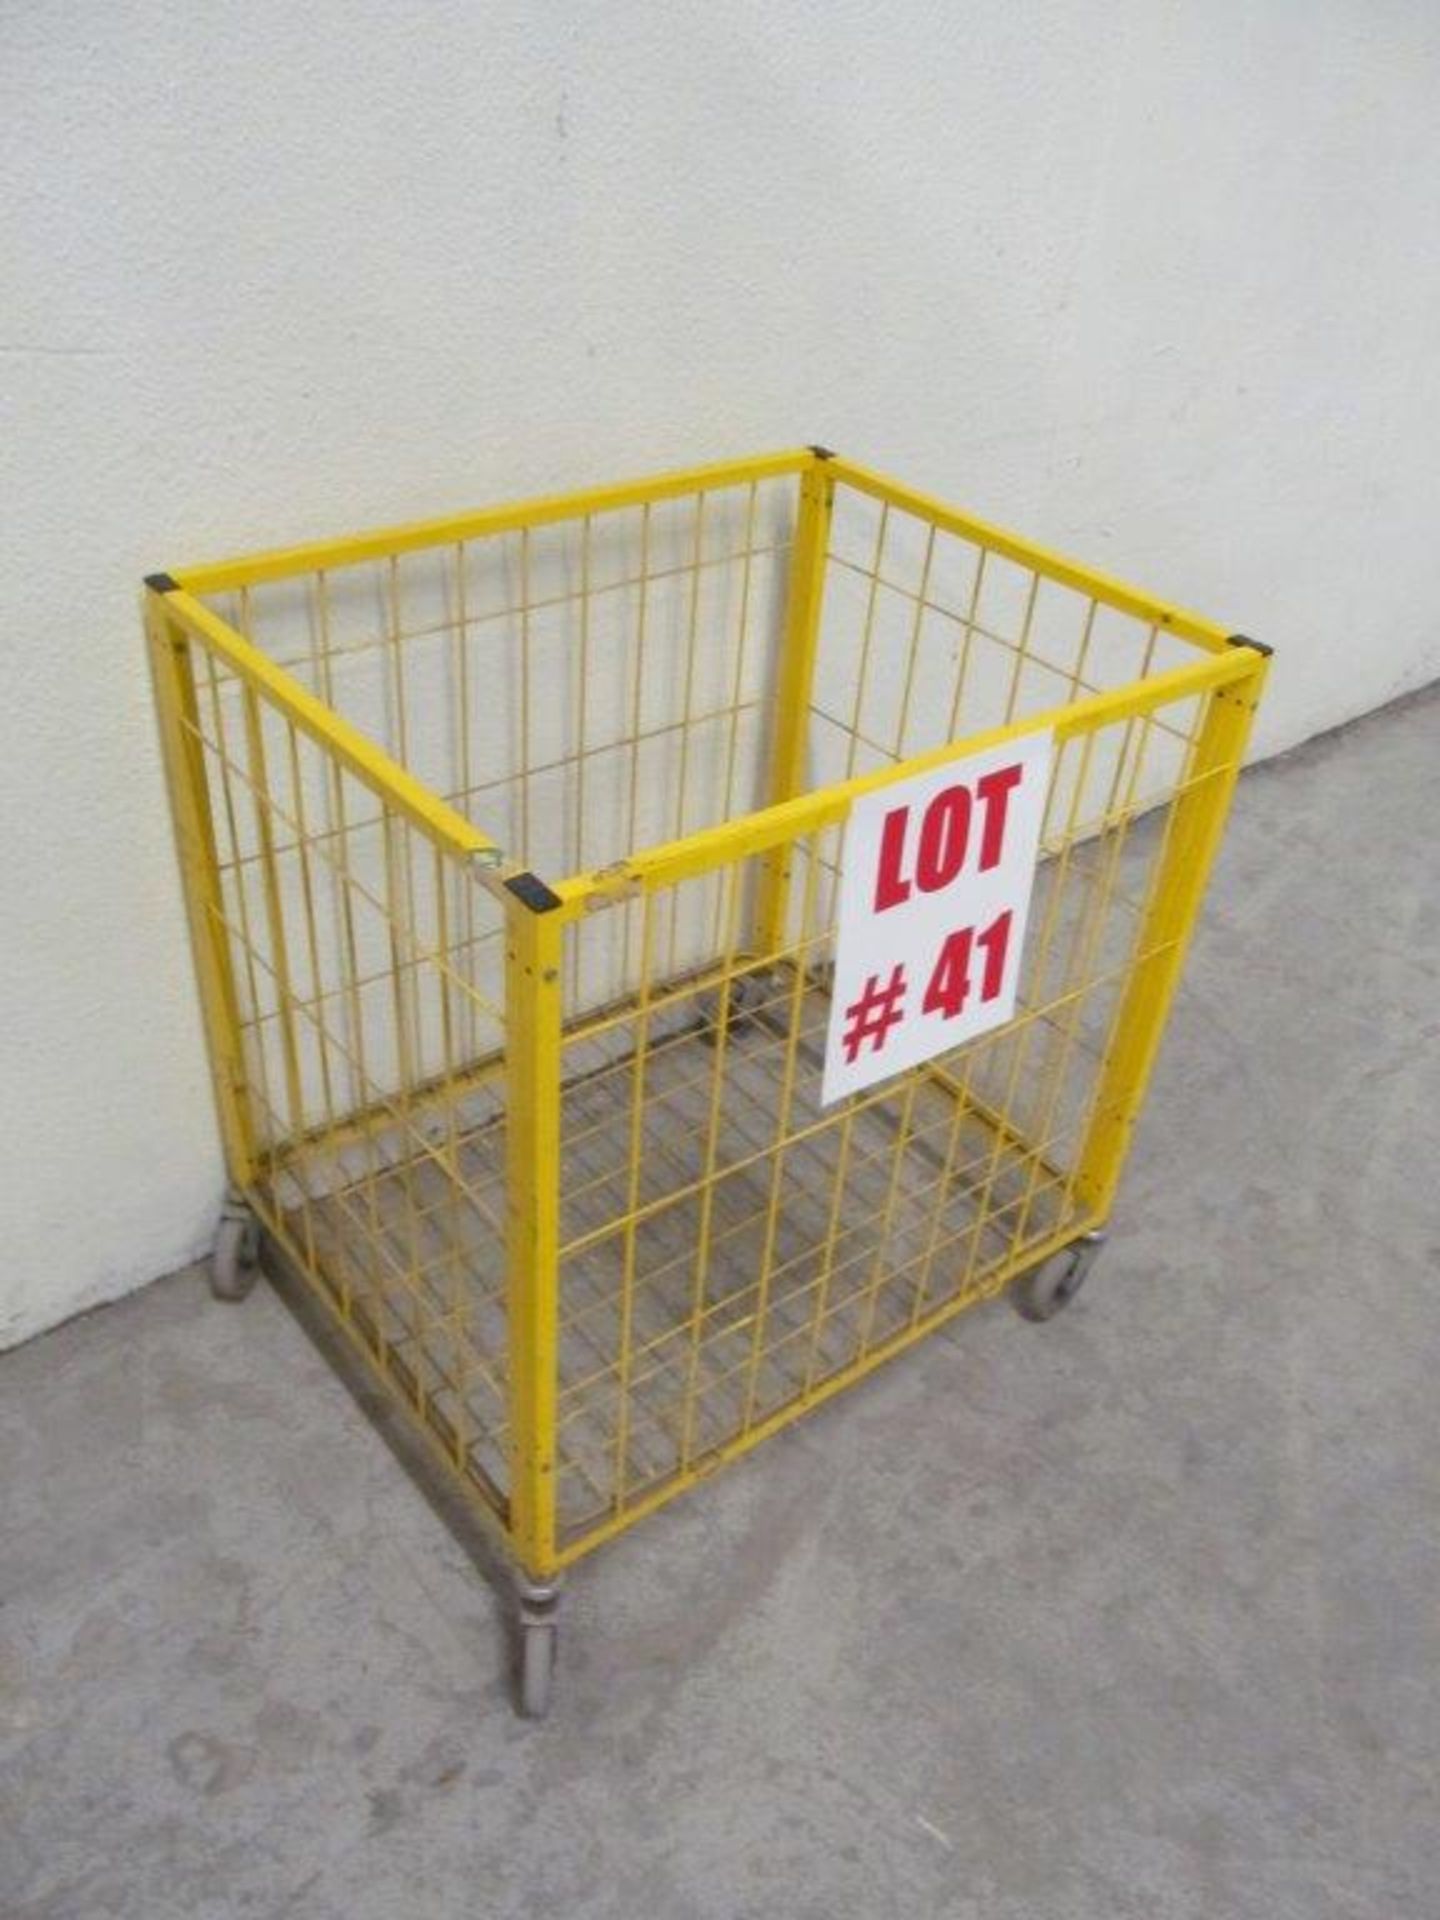 STEEL ROLL AROUND CART 0N CASTERS, 30 1/2'' LONG X 24 1/2'' WIDE X 32'' HIGH